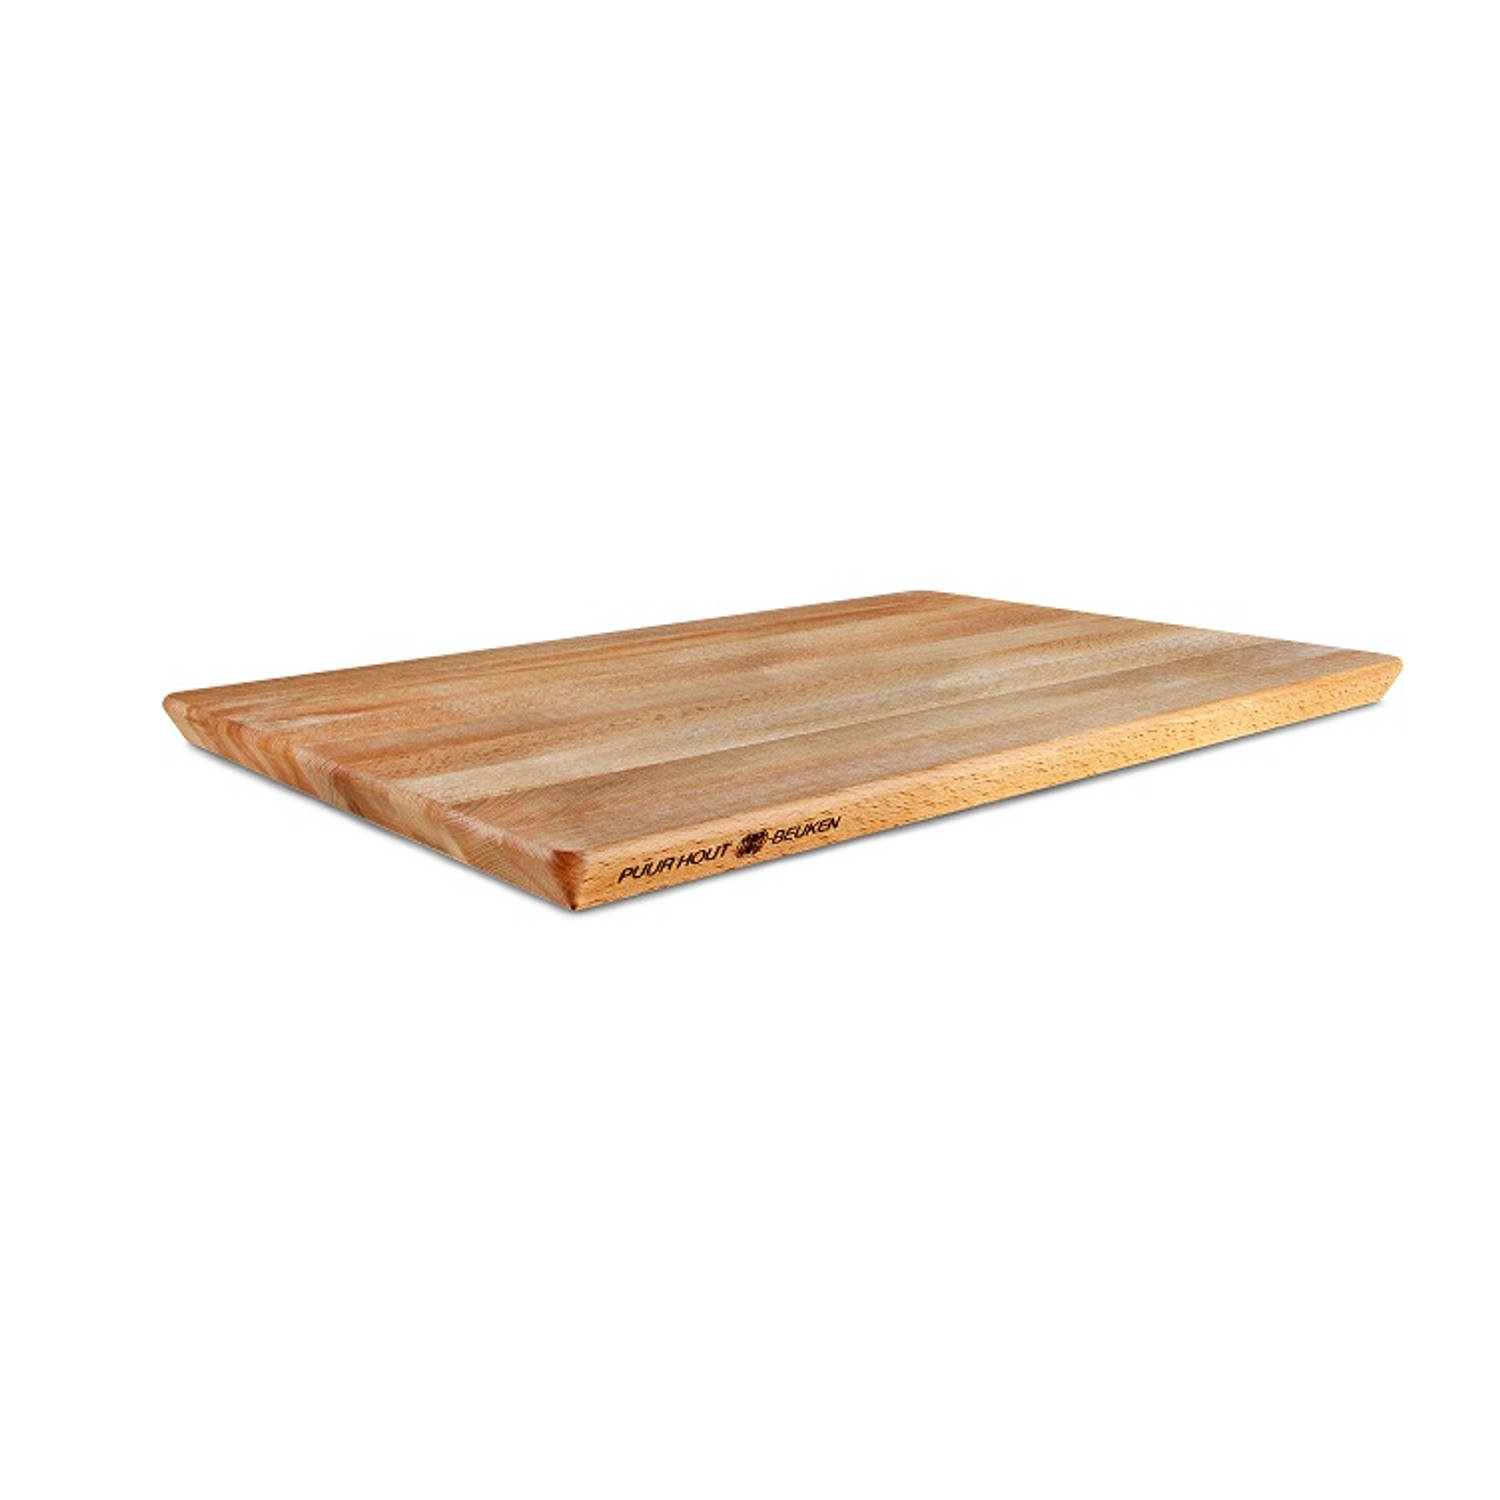 Bowls and Dishes Puur Hout Beuken Broodplank 45 cm